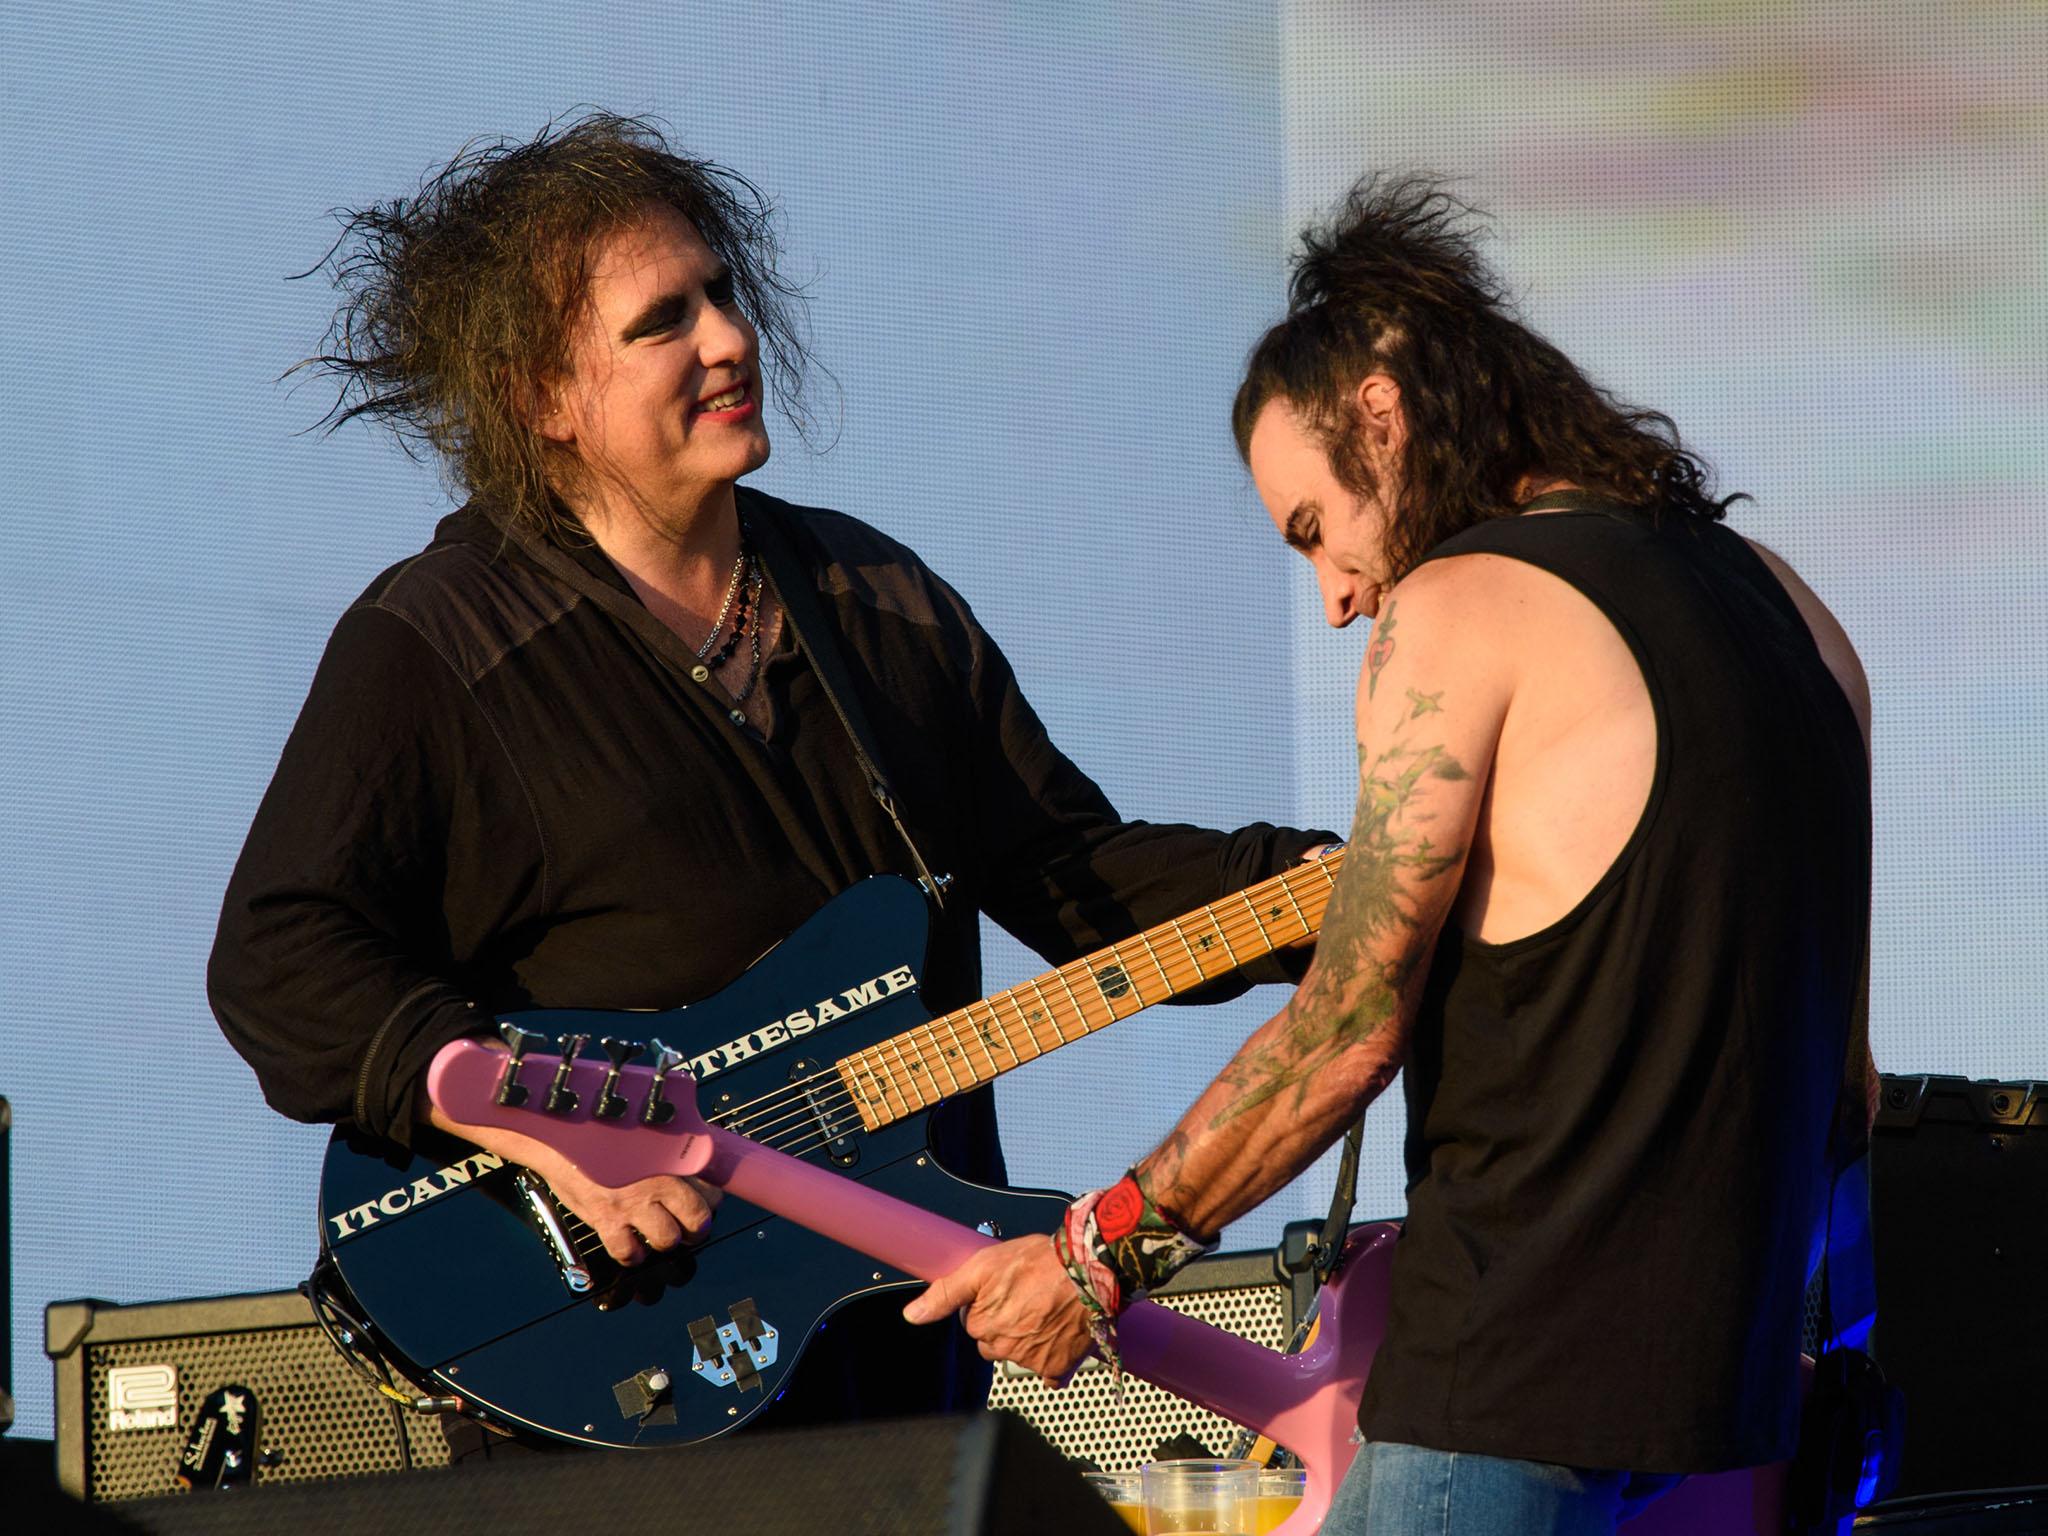 Robert Smith says The Cure have finished recording their first album in 10  years, The Independent